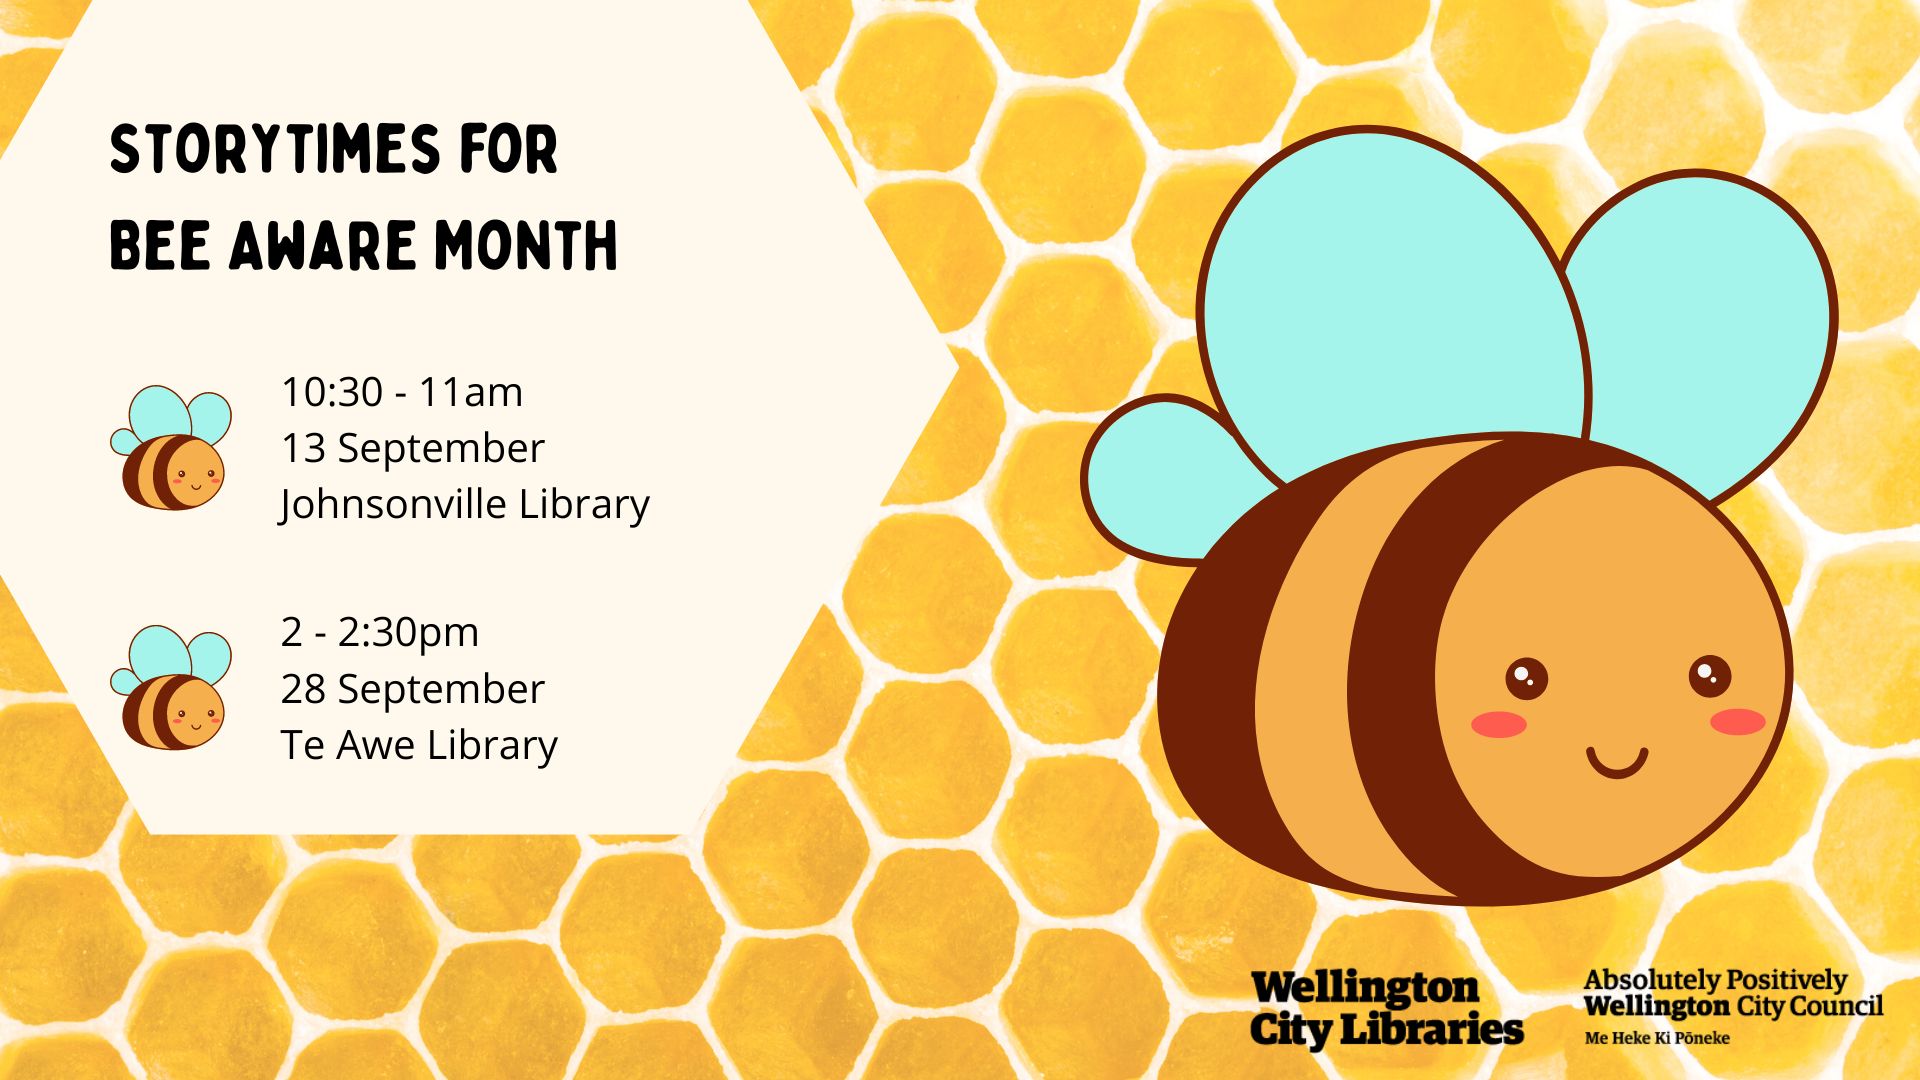 Storytimes for Bee Aware Month 13 September  10:30am Johnsonvilee Library and 28 September 2pm Te Awe Library.